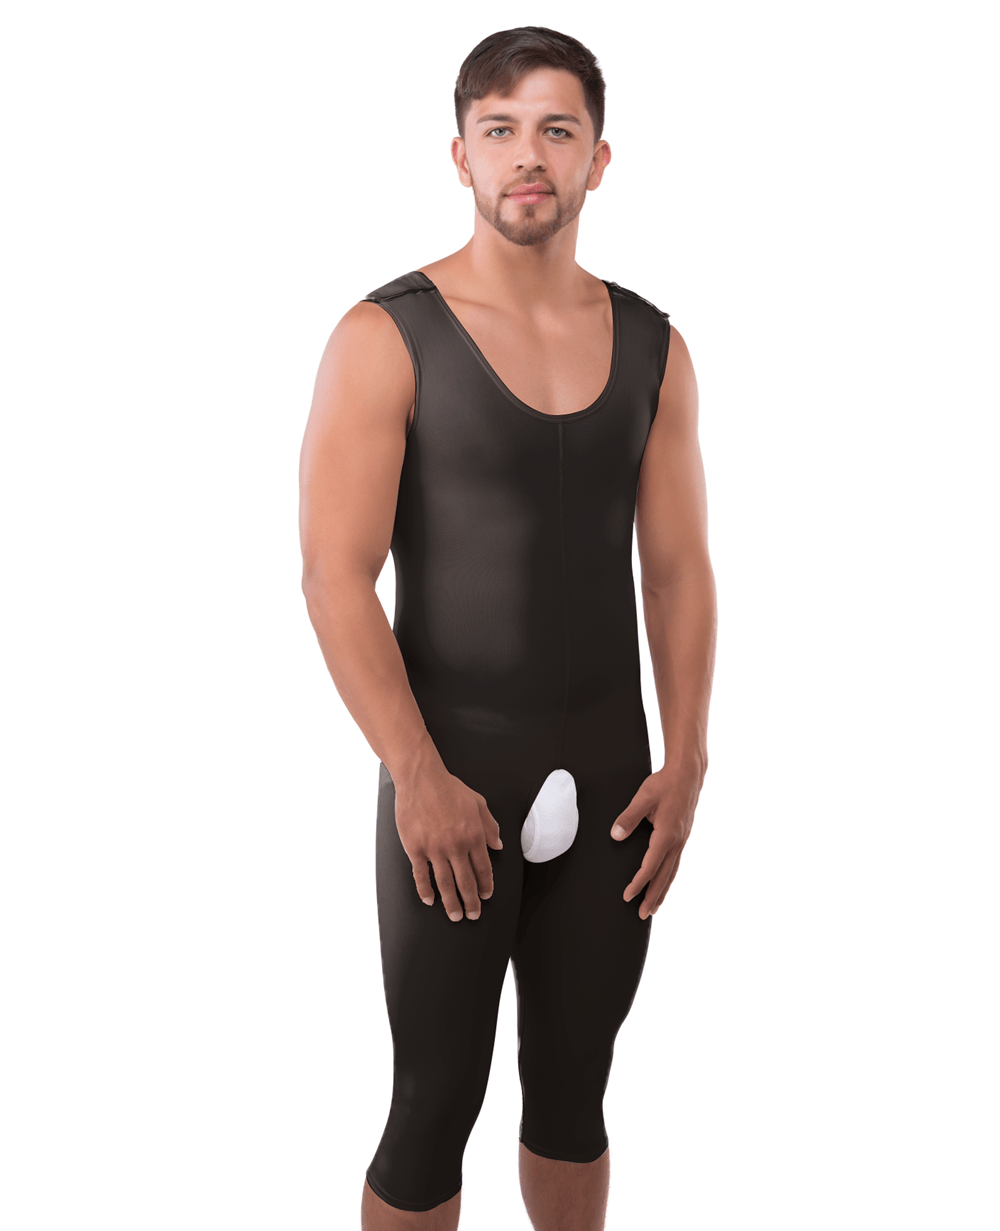 2nd Stage Male Full Body Below Knee Abdominal Cosmetic Surgery Compression Garment (MG08-BK)